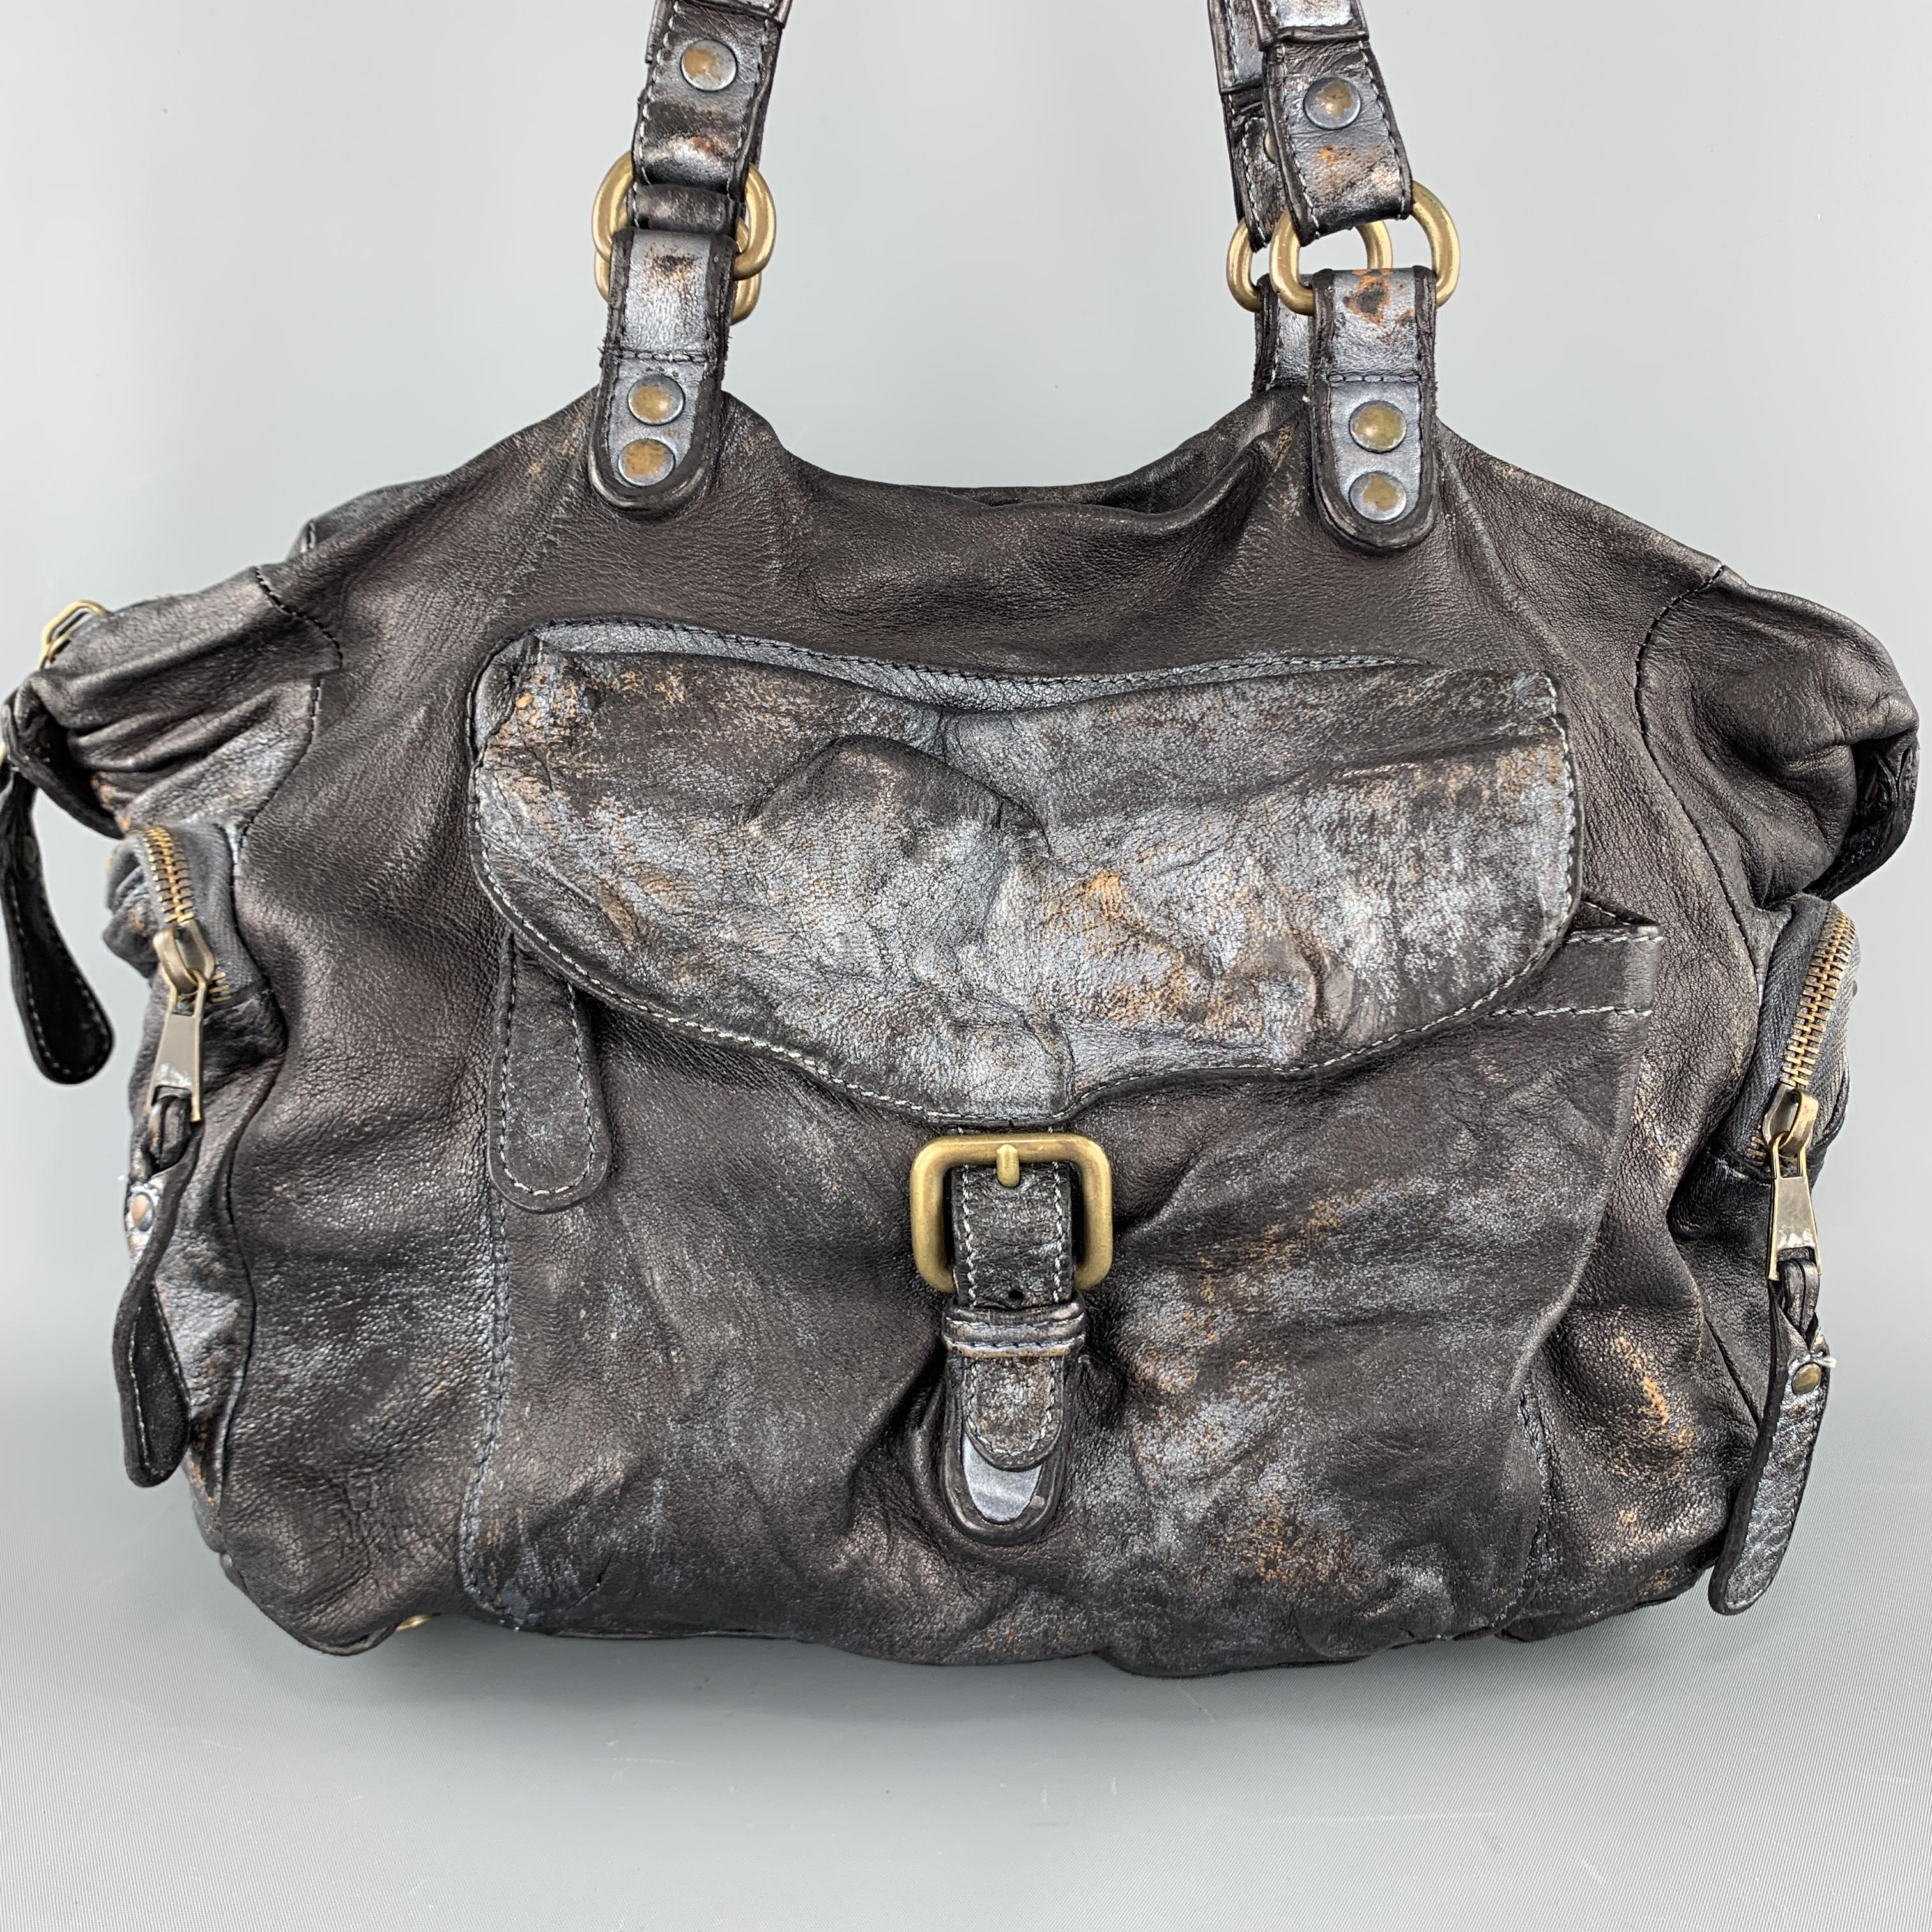 GIORGIO BRATO handbag comes in distressed charcoal leather with all over metallic qualities, zip pocket sides, flap buckled pocket front, double top straps, and top zip closure. With dust bag. 

Very Good Pre-Owned Condition.

Measurements:

Length: